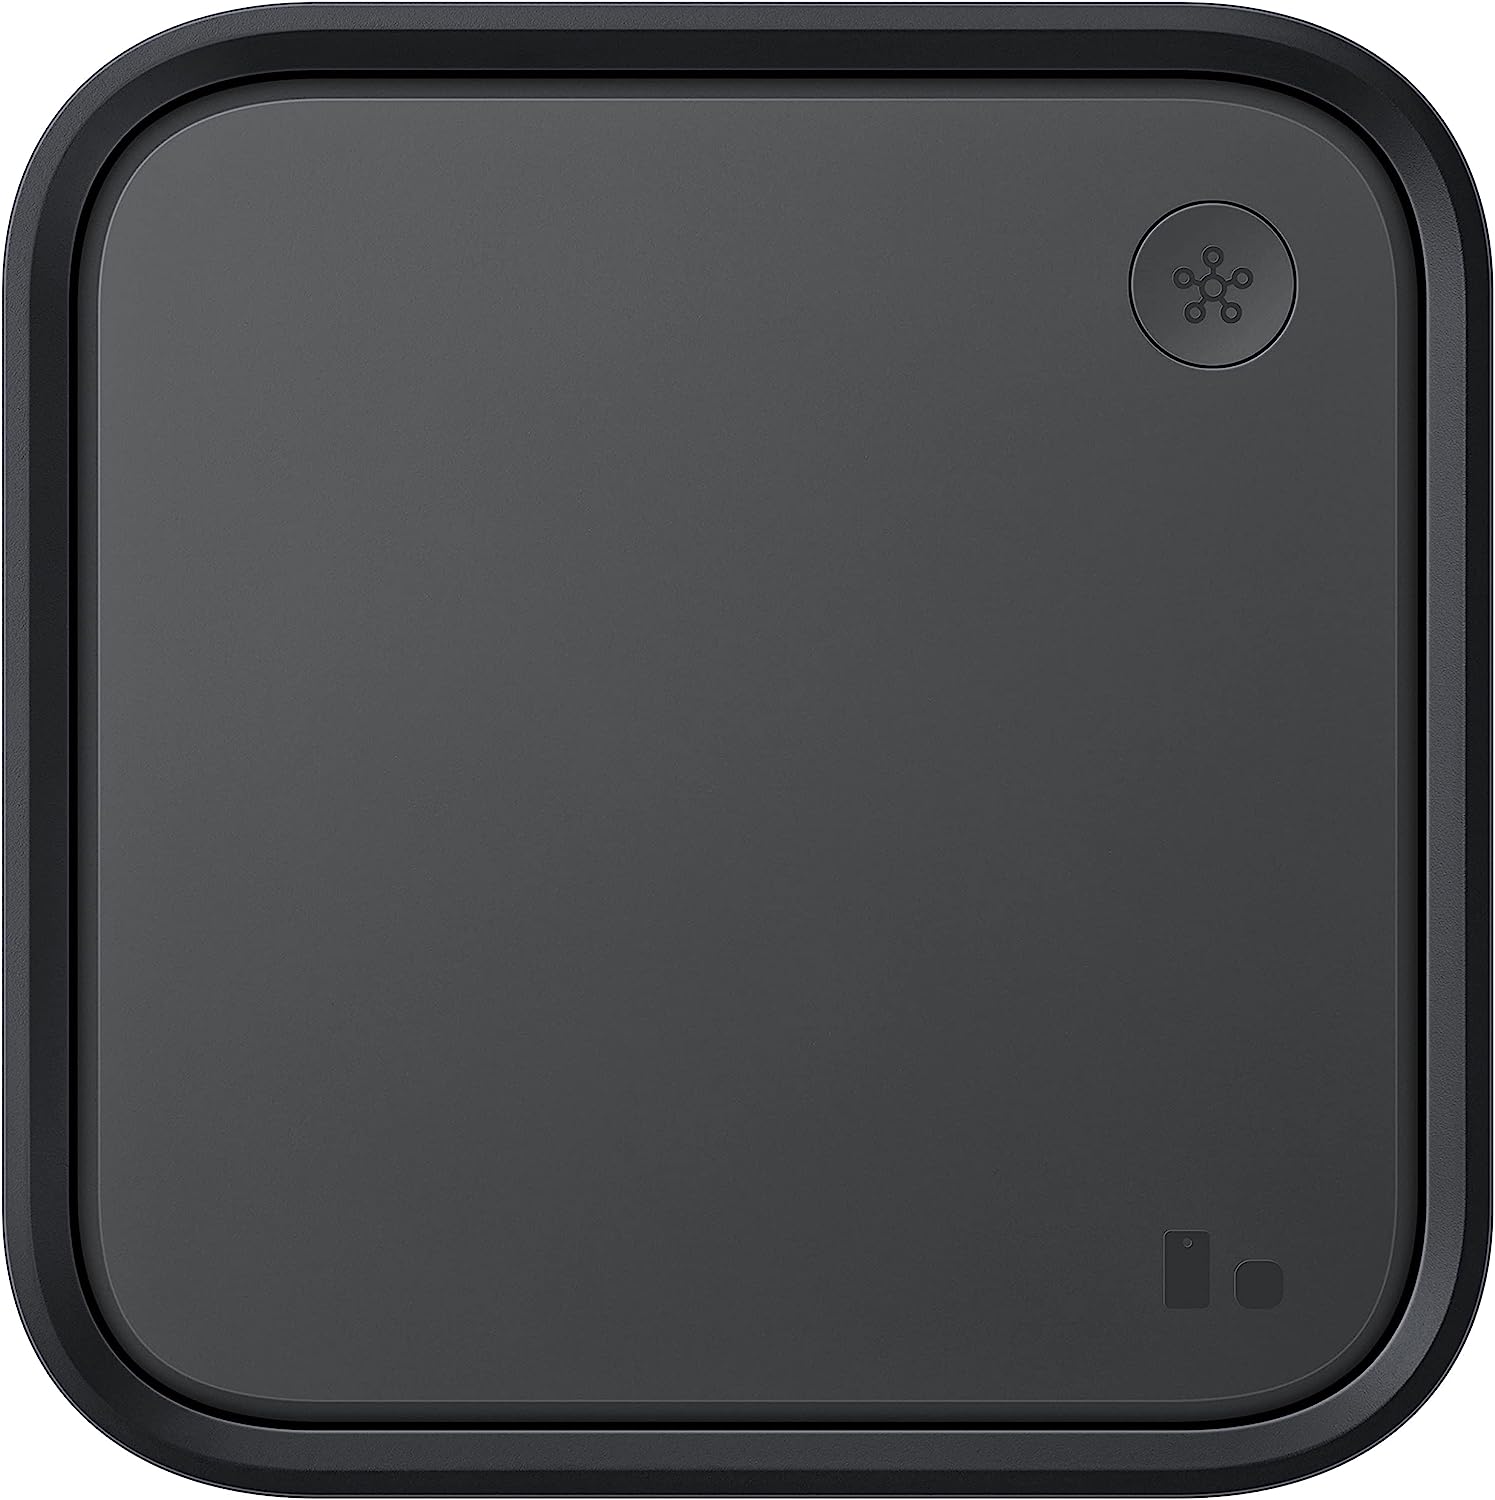 Samsung SmartThings Wireless Charger Station - Black (Refurbished)